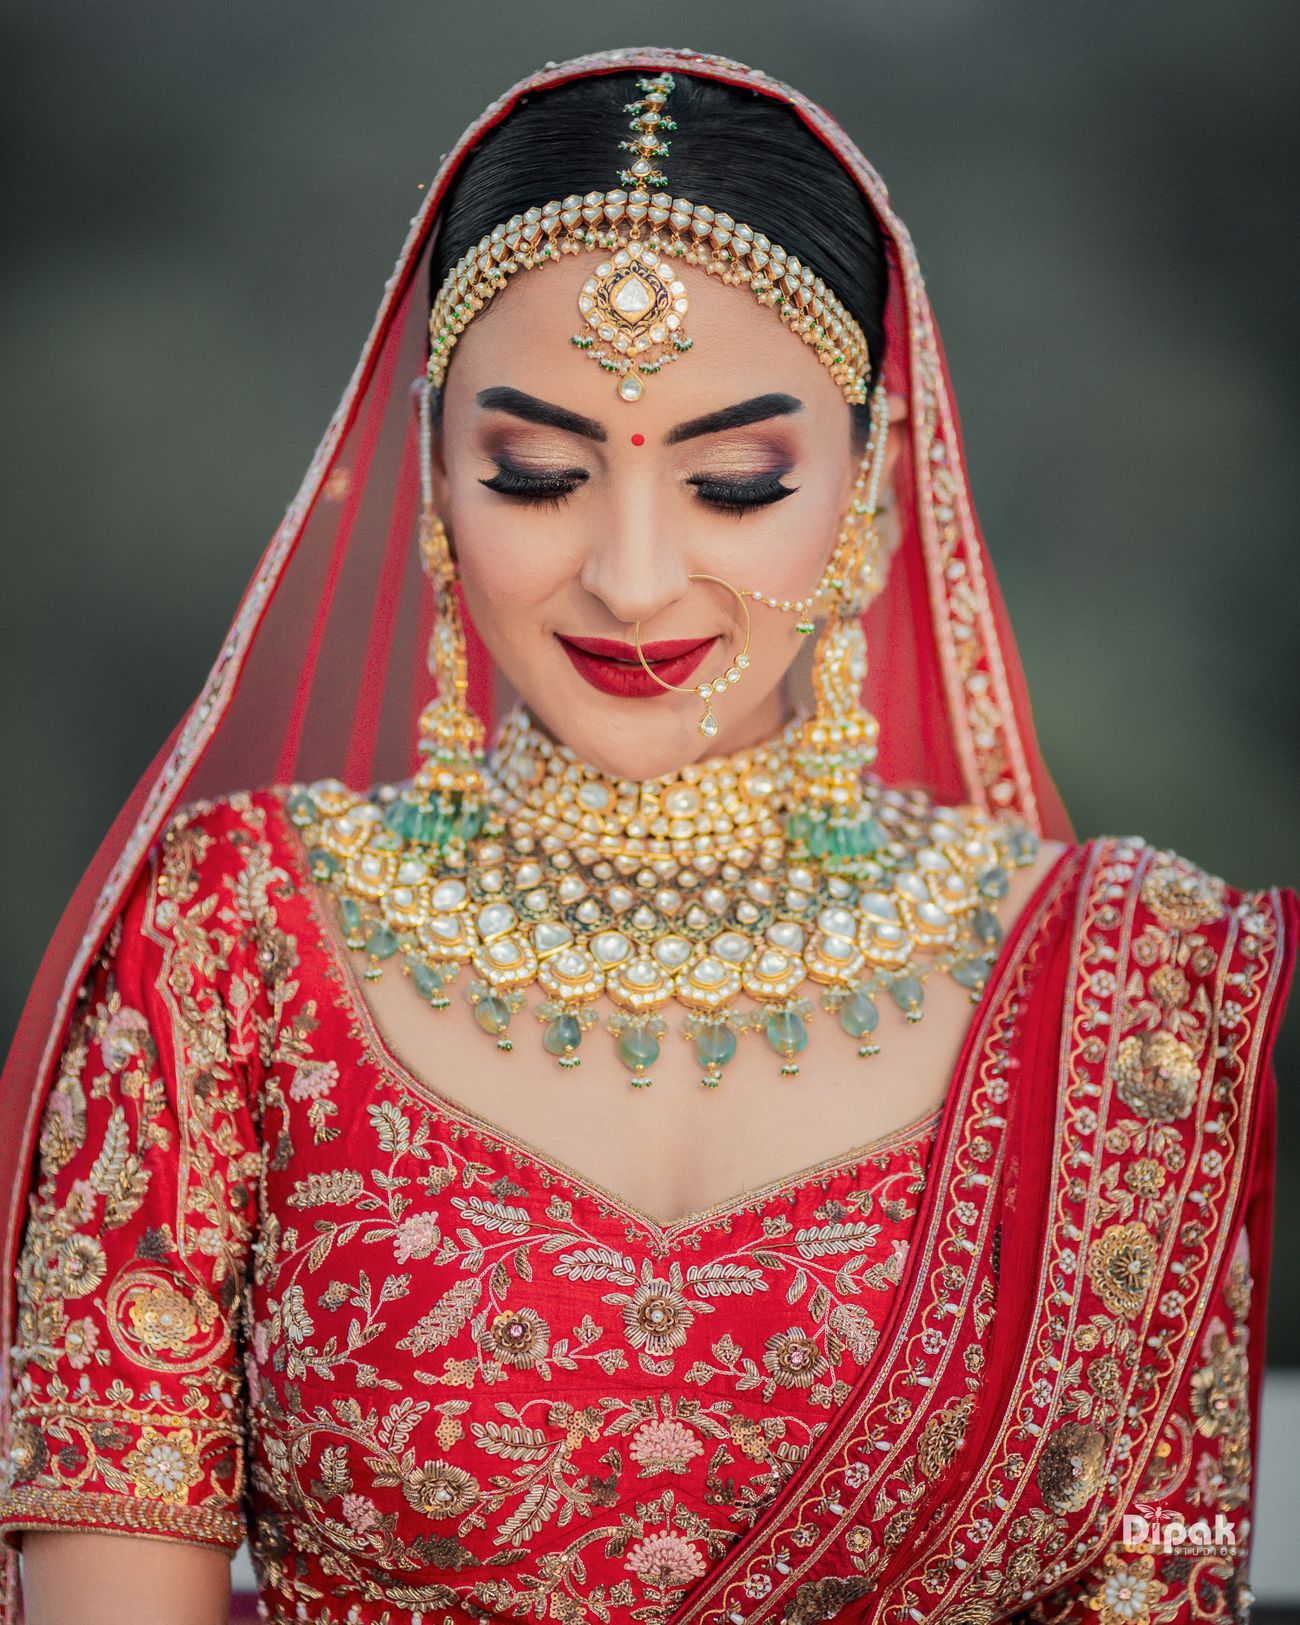 Fun Filled Delhi Wedding Where The Bride Designed All Outfits Herself ...